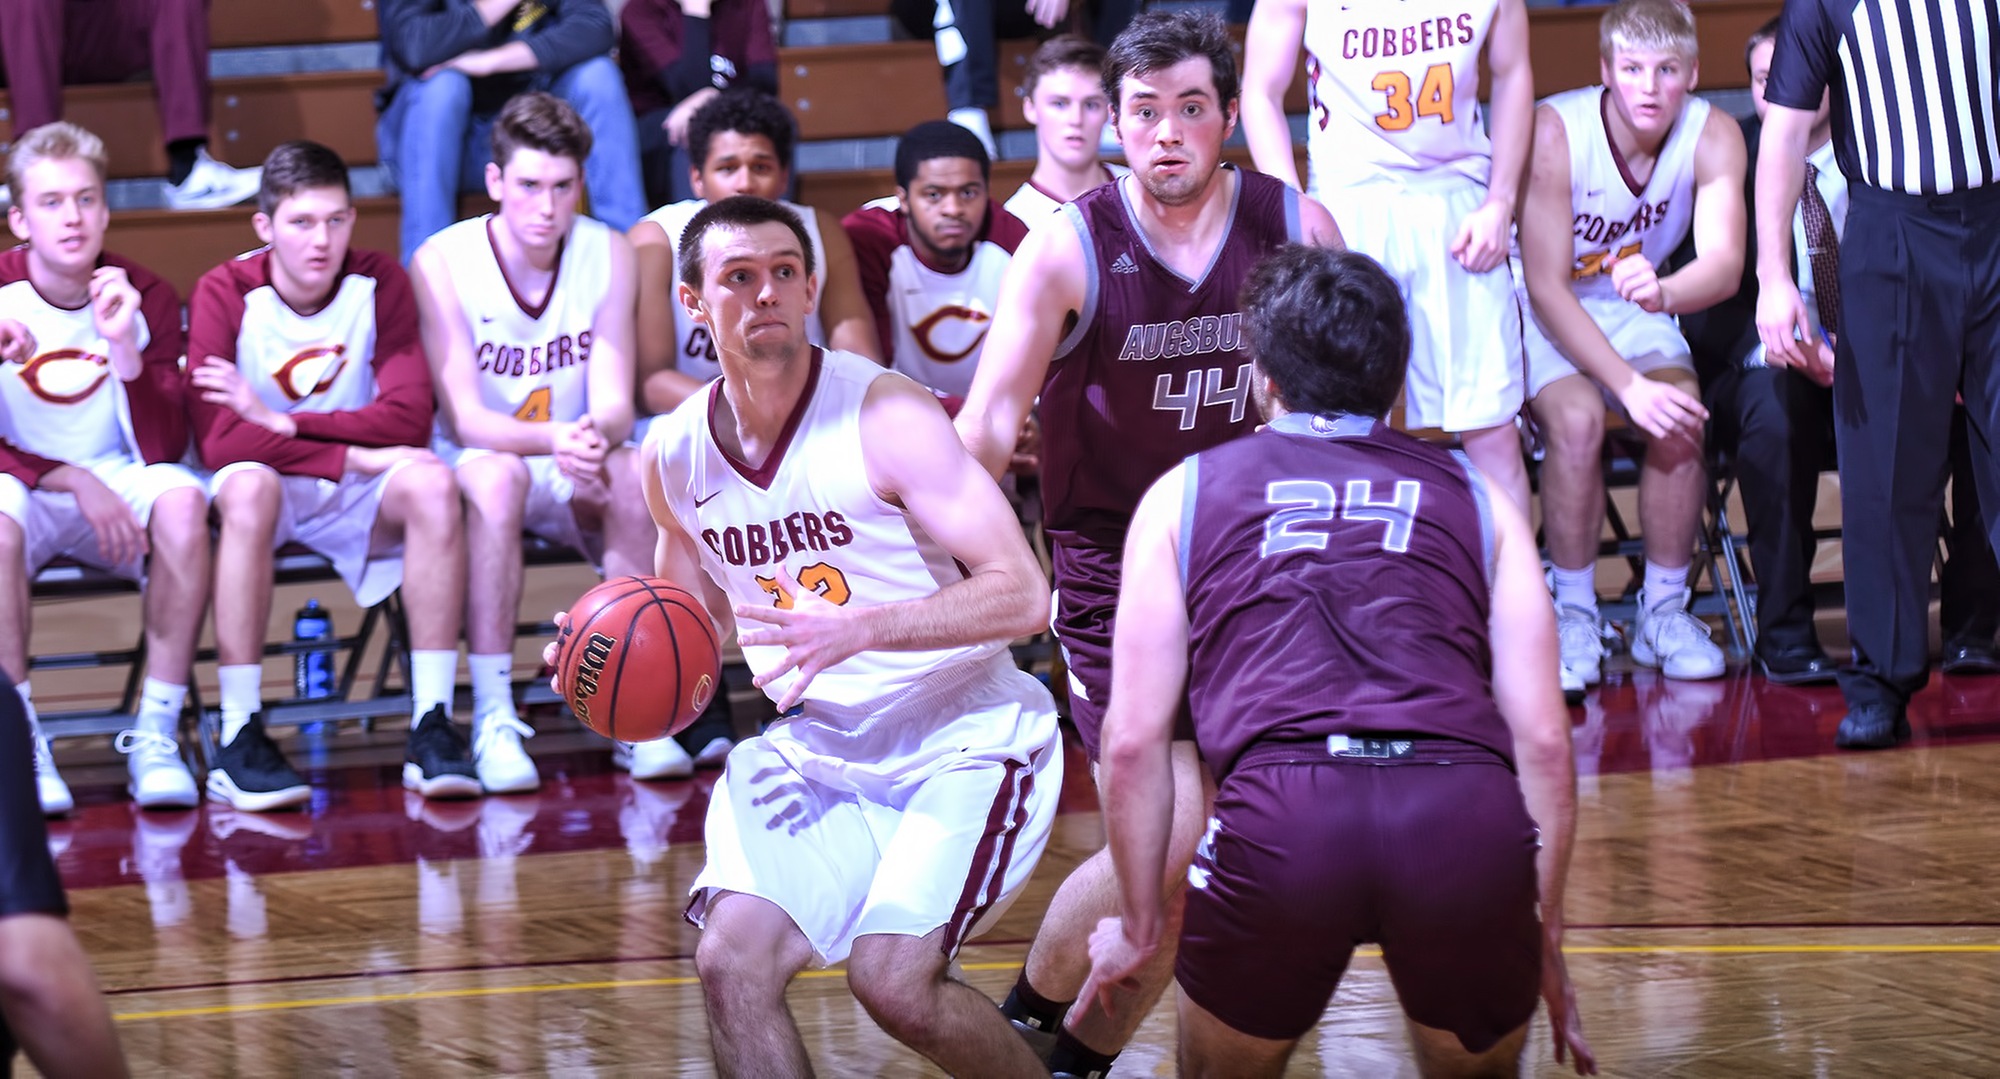 Junior Jacob Fredrickson had a career-high 16 points in the Cobbers' game at Augsburg.